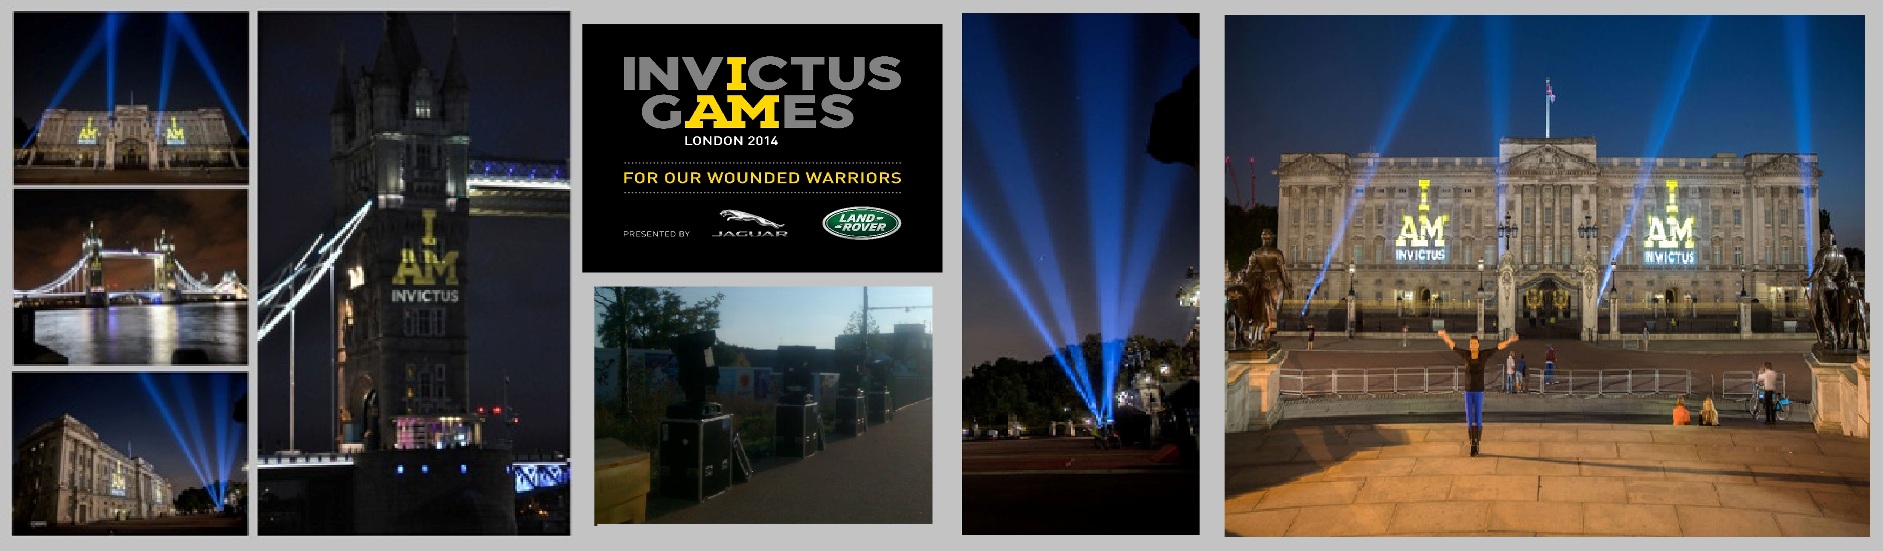 Searchlights over London for Invictus Games